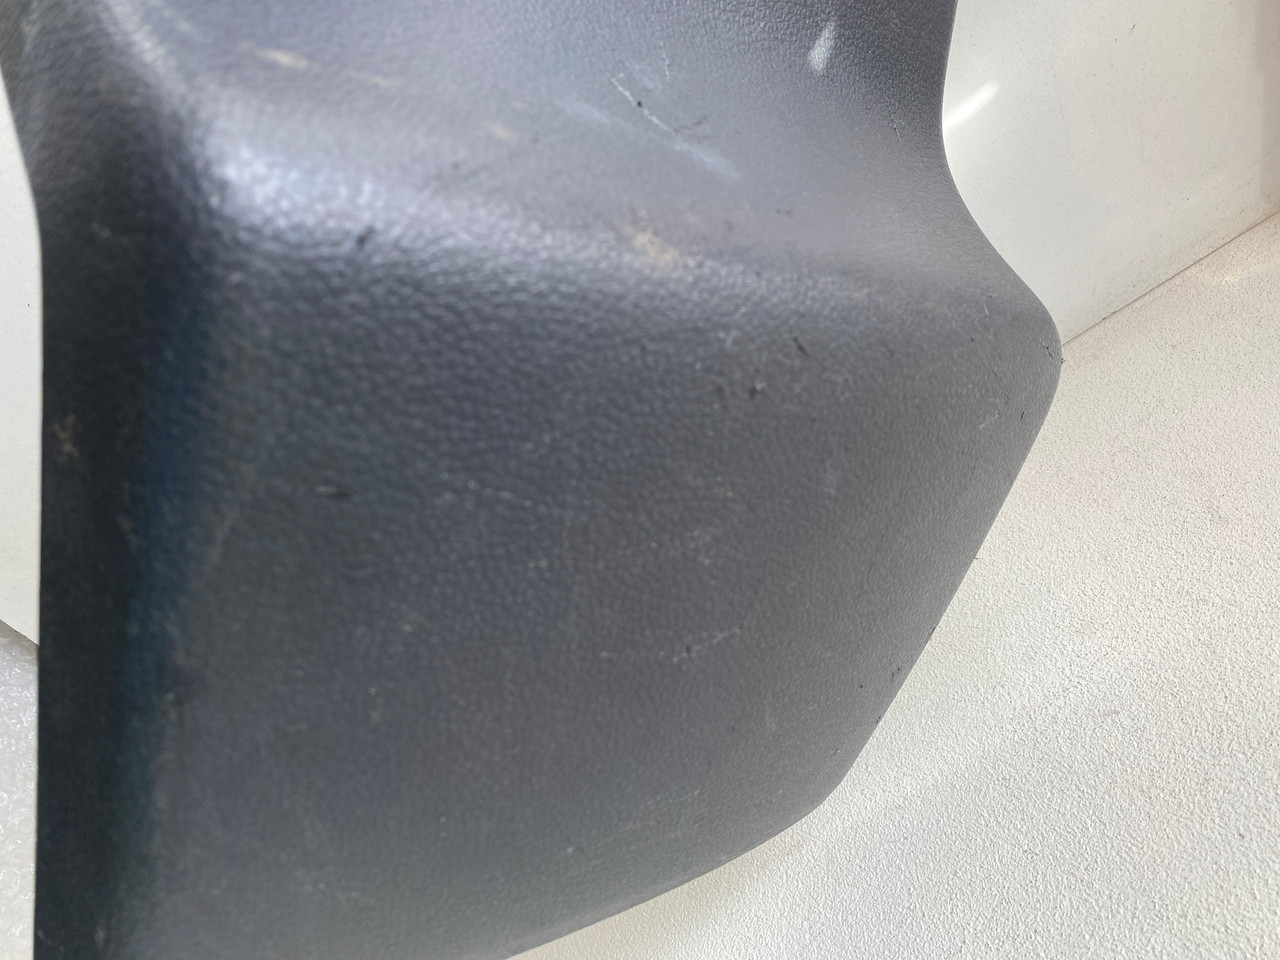 VW AMAROK USED GREY CENTRE CONSOLE COVER 2H0 863 680 F - Parts 4 ...